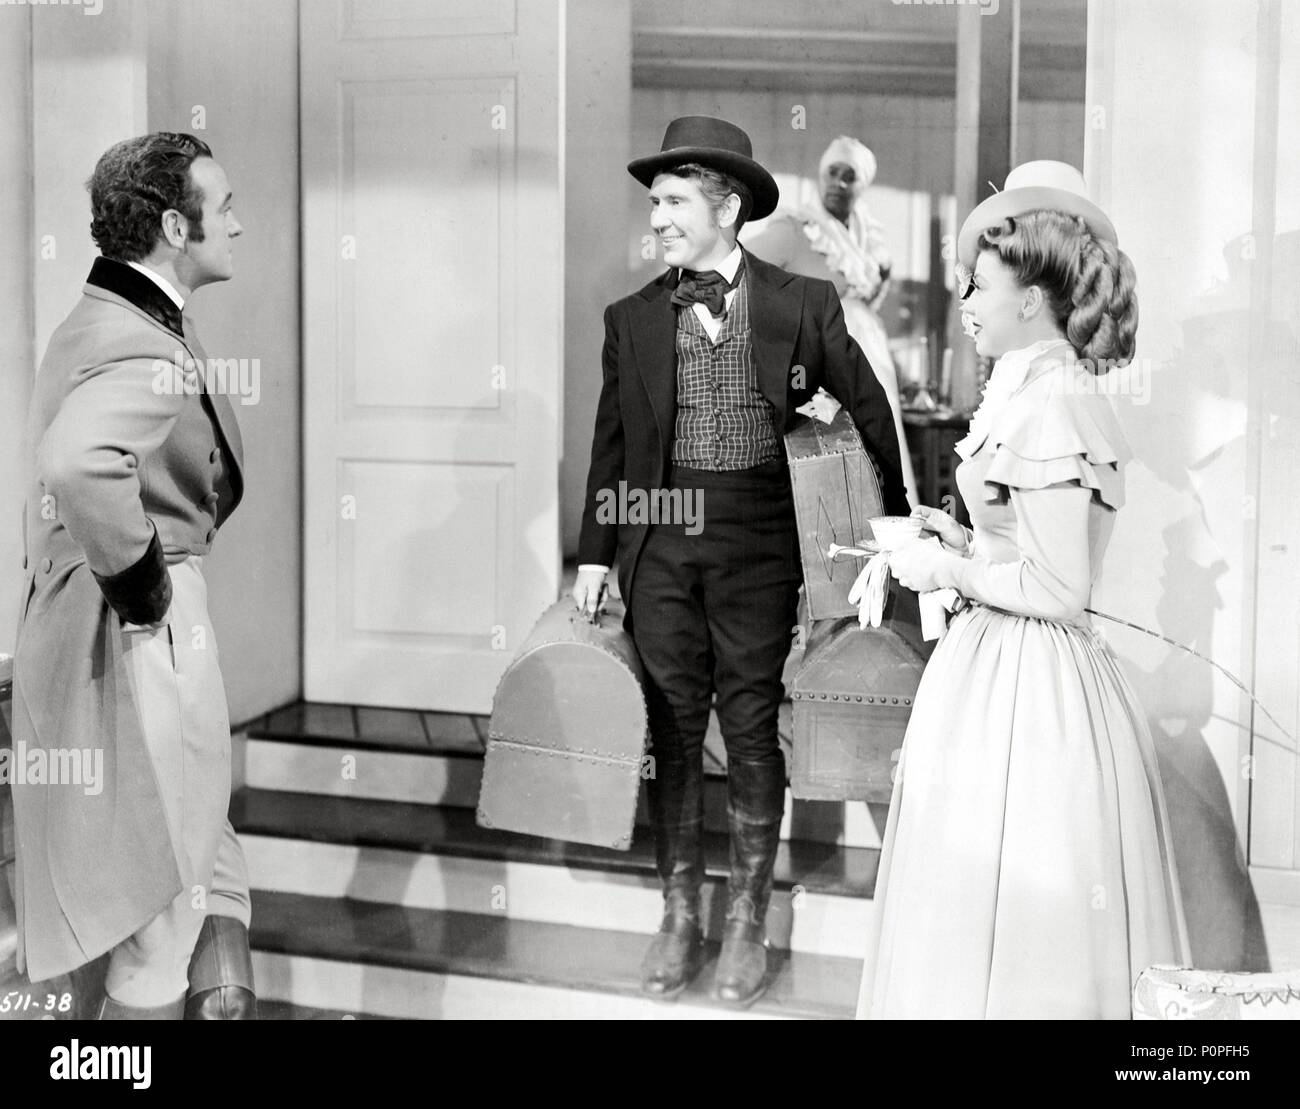 Original Film Title: MAGNIFICENT DOLL.  English Title: MAGNIFICENT DOLL.  Film Director: FRANK BORZAGE.  Year: 1946.  Stars: GINGER ROGERS; DAVID NIVEN; BURGESS MEREDITH. Credit: UNIVERSAL PICTURES / Album Stock Photo